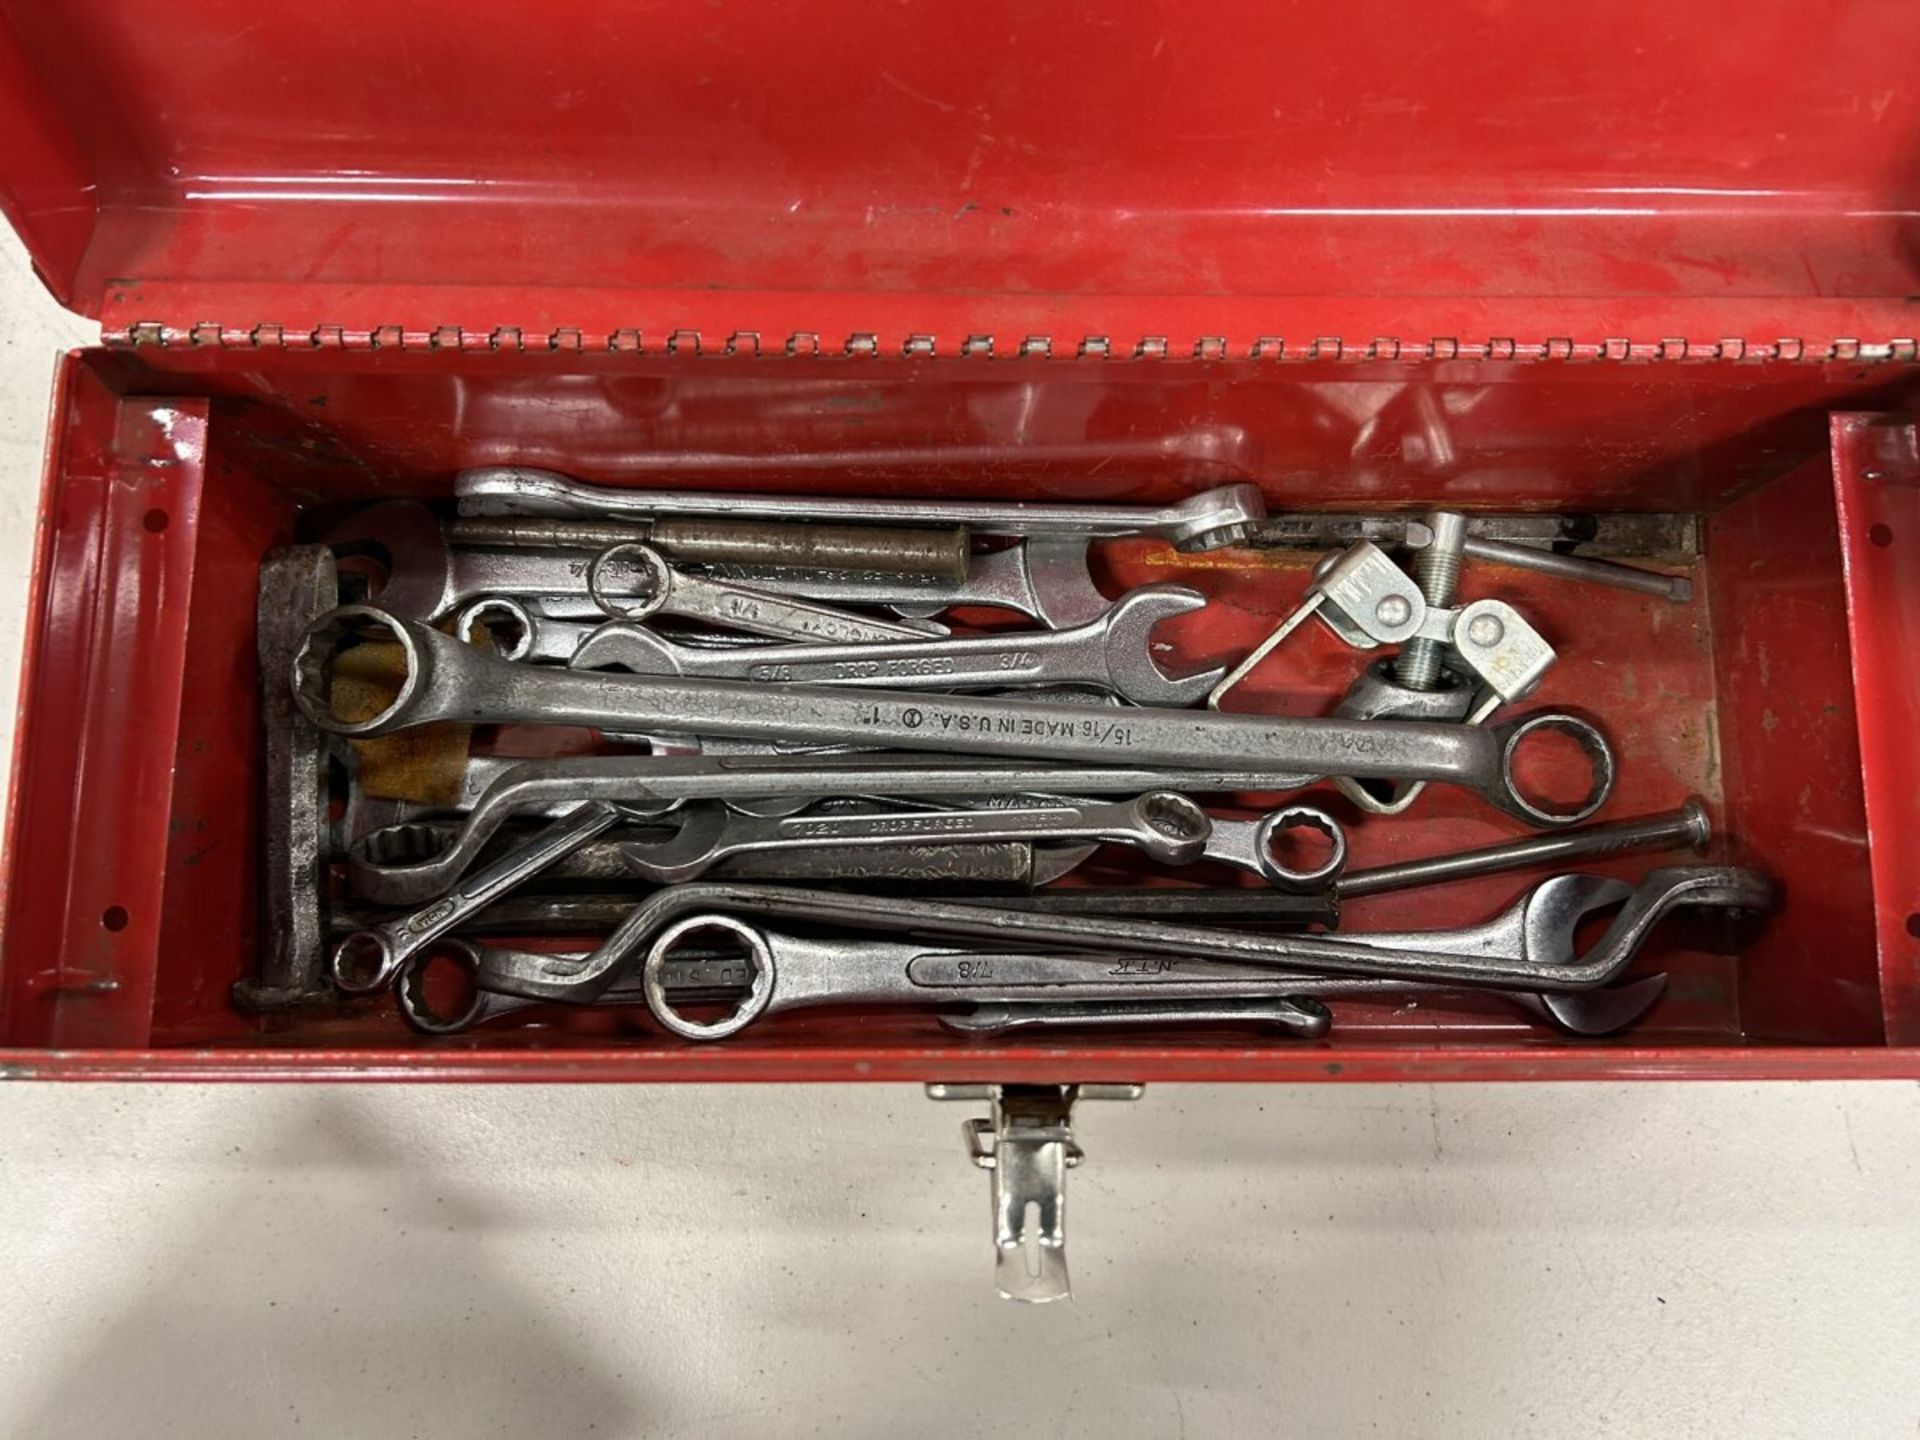 MASTERCRAFT TOOL BOX W/ ASSORTED WRENCHES AND SOCKETS - Image 3 of 4